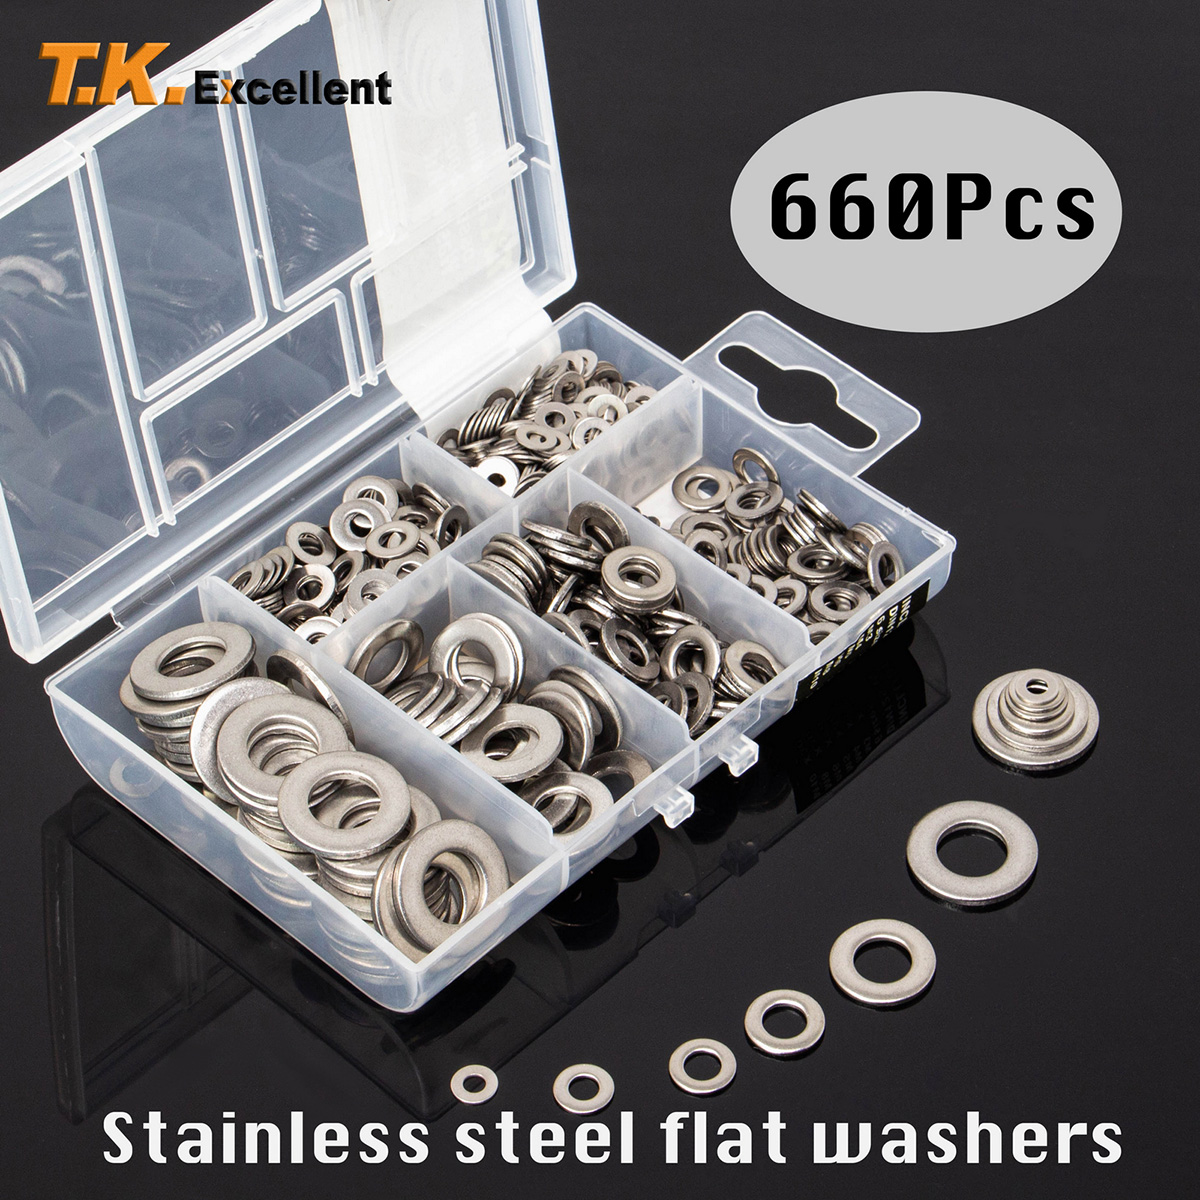 304 Stainless Steel Washers Flat Washer Assortment Set Value Kit,660 Pieces 